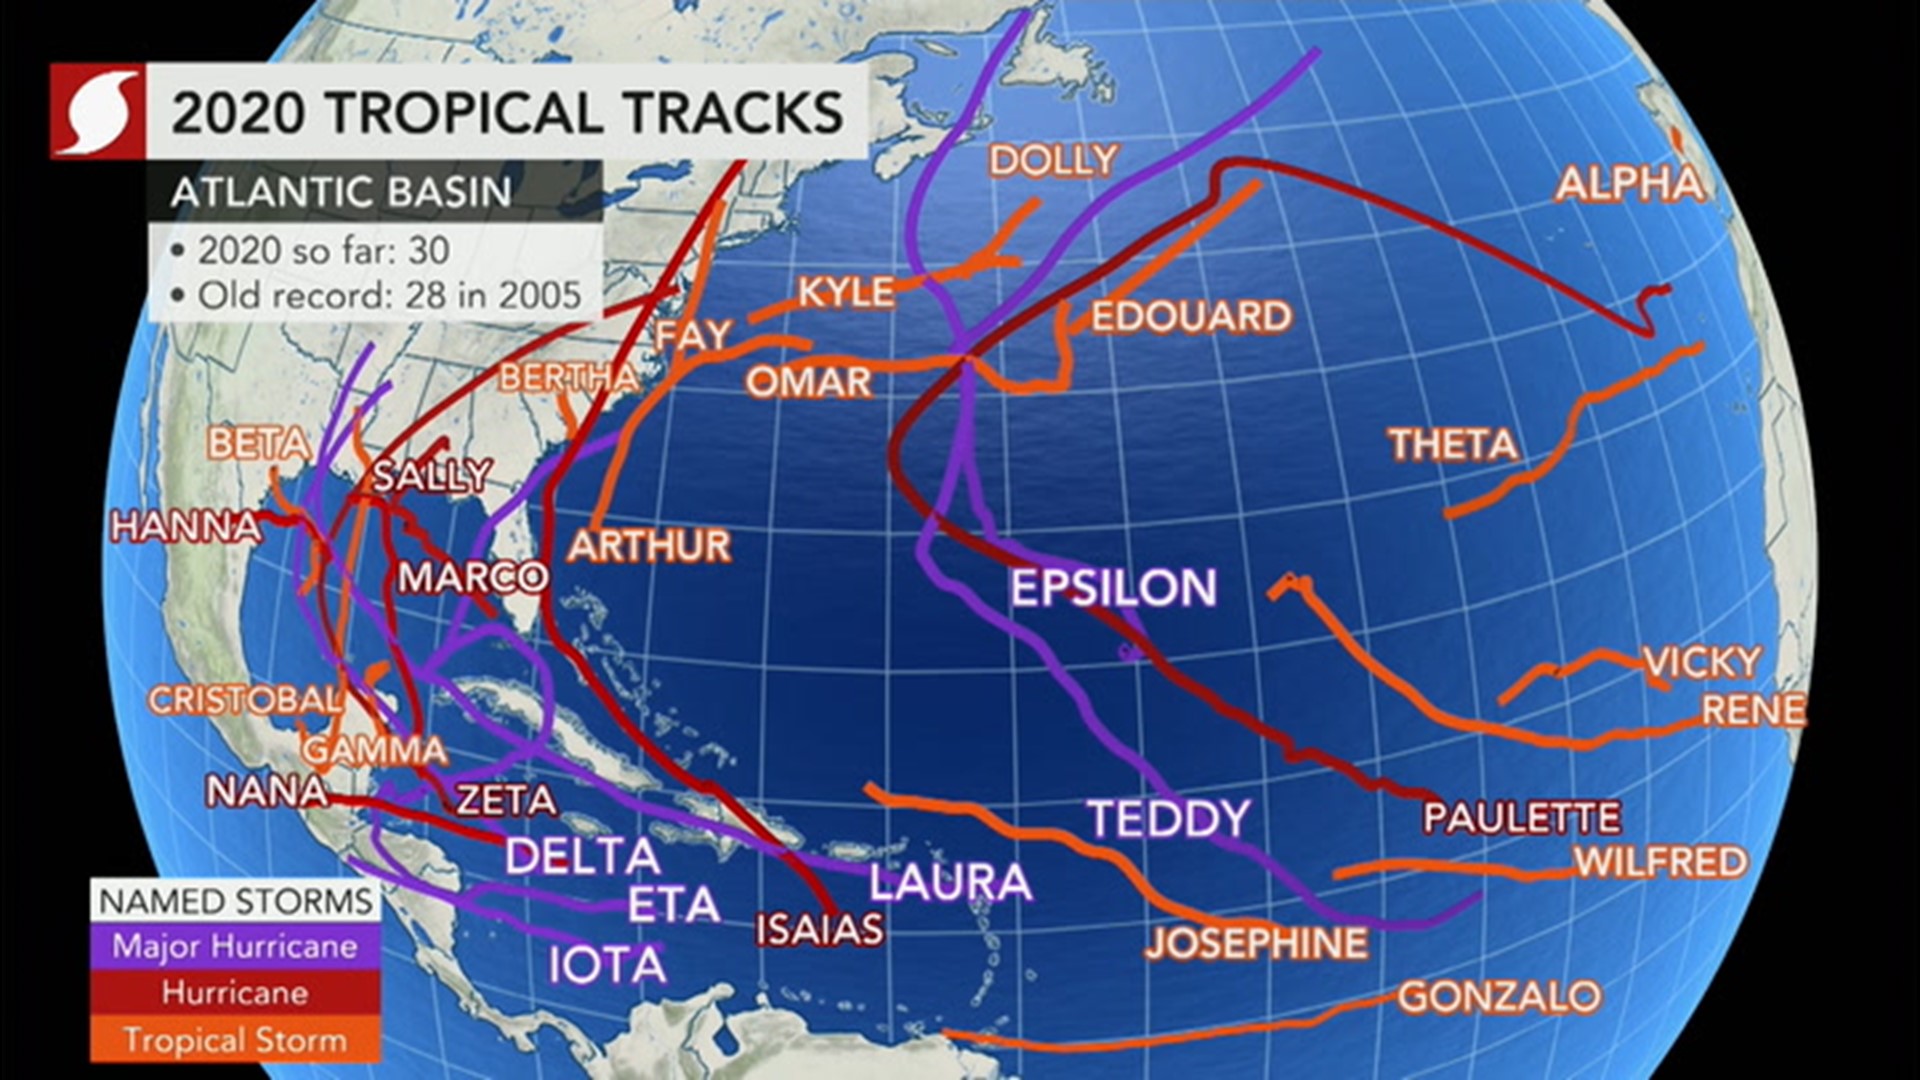 AccuWeather Expert Senior Meteorologist Dan Kottlowski breaks down the historic, record-breaking 2020 hurricane season as it comes to a close on the last day of November.